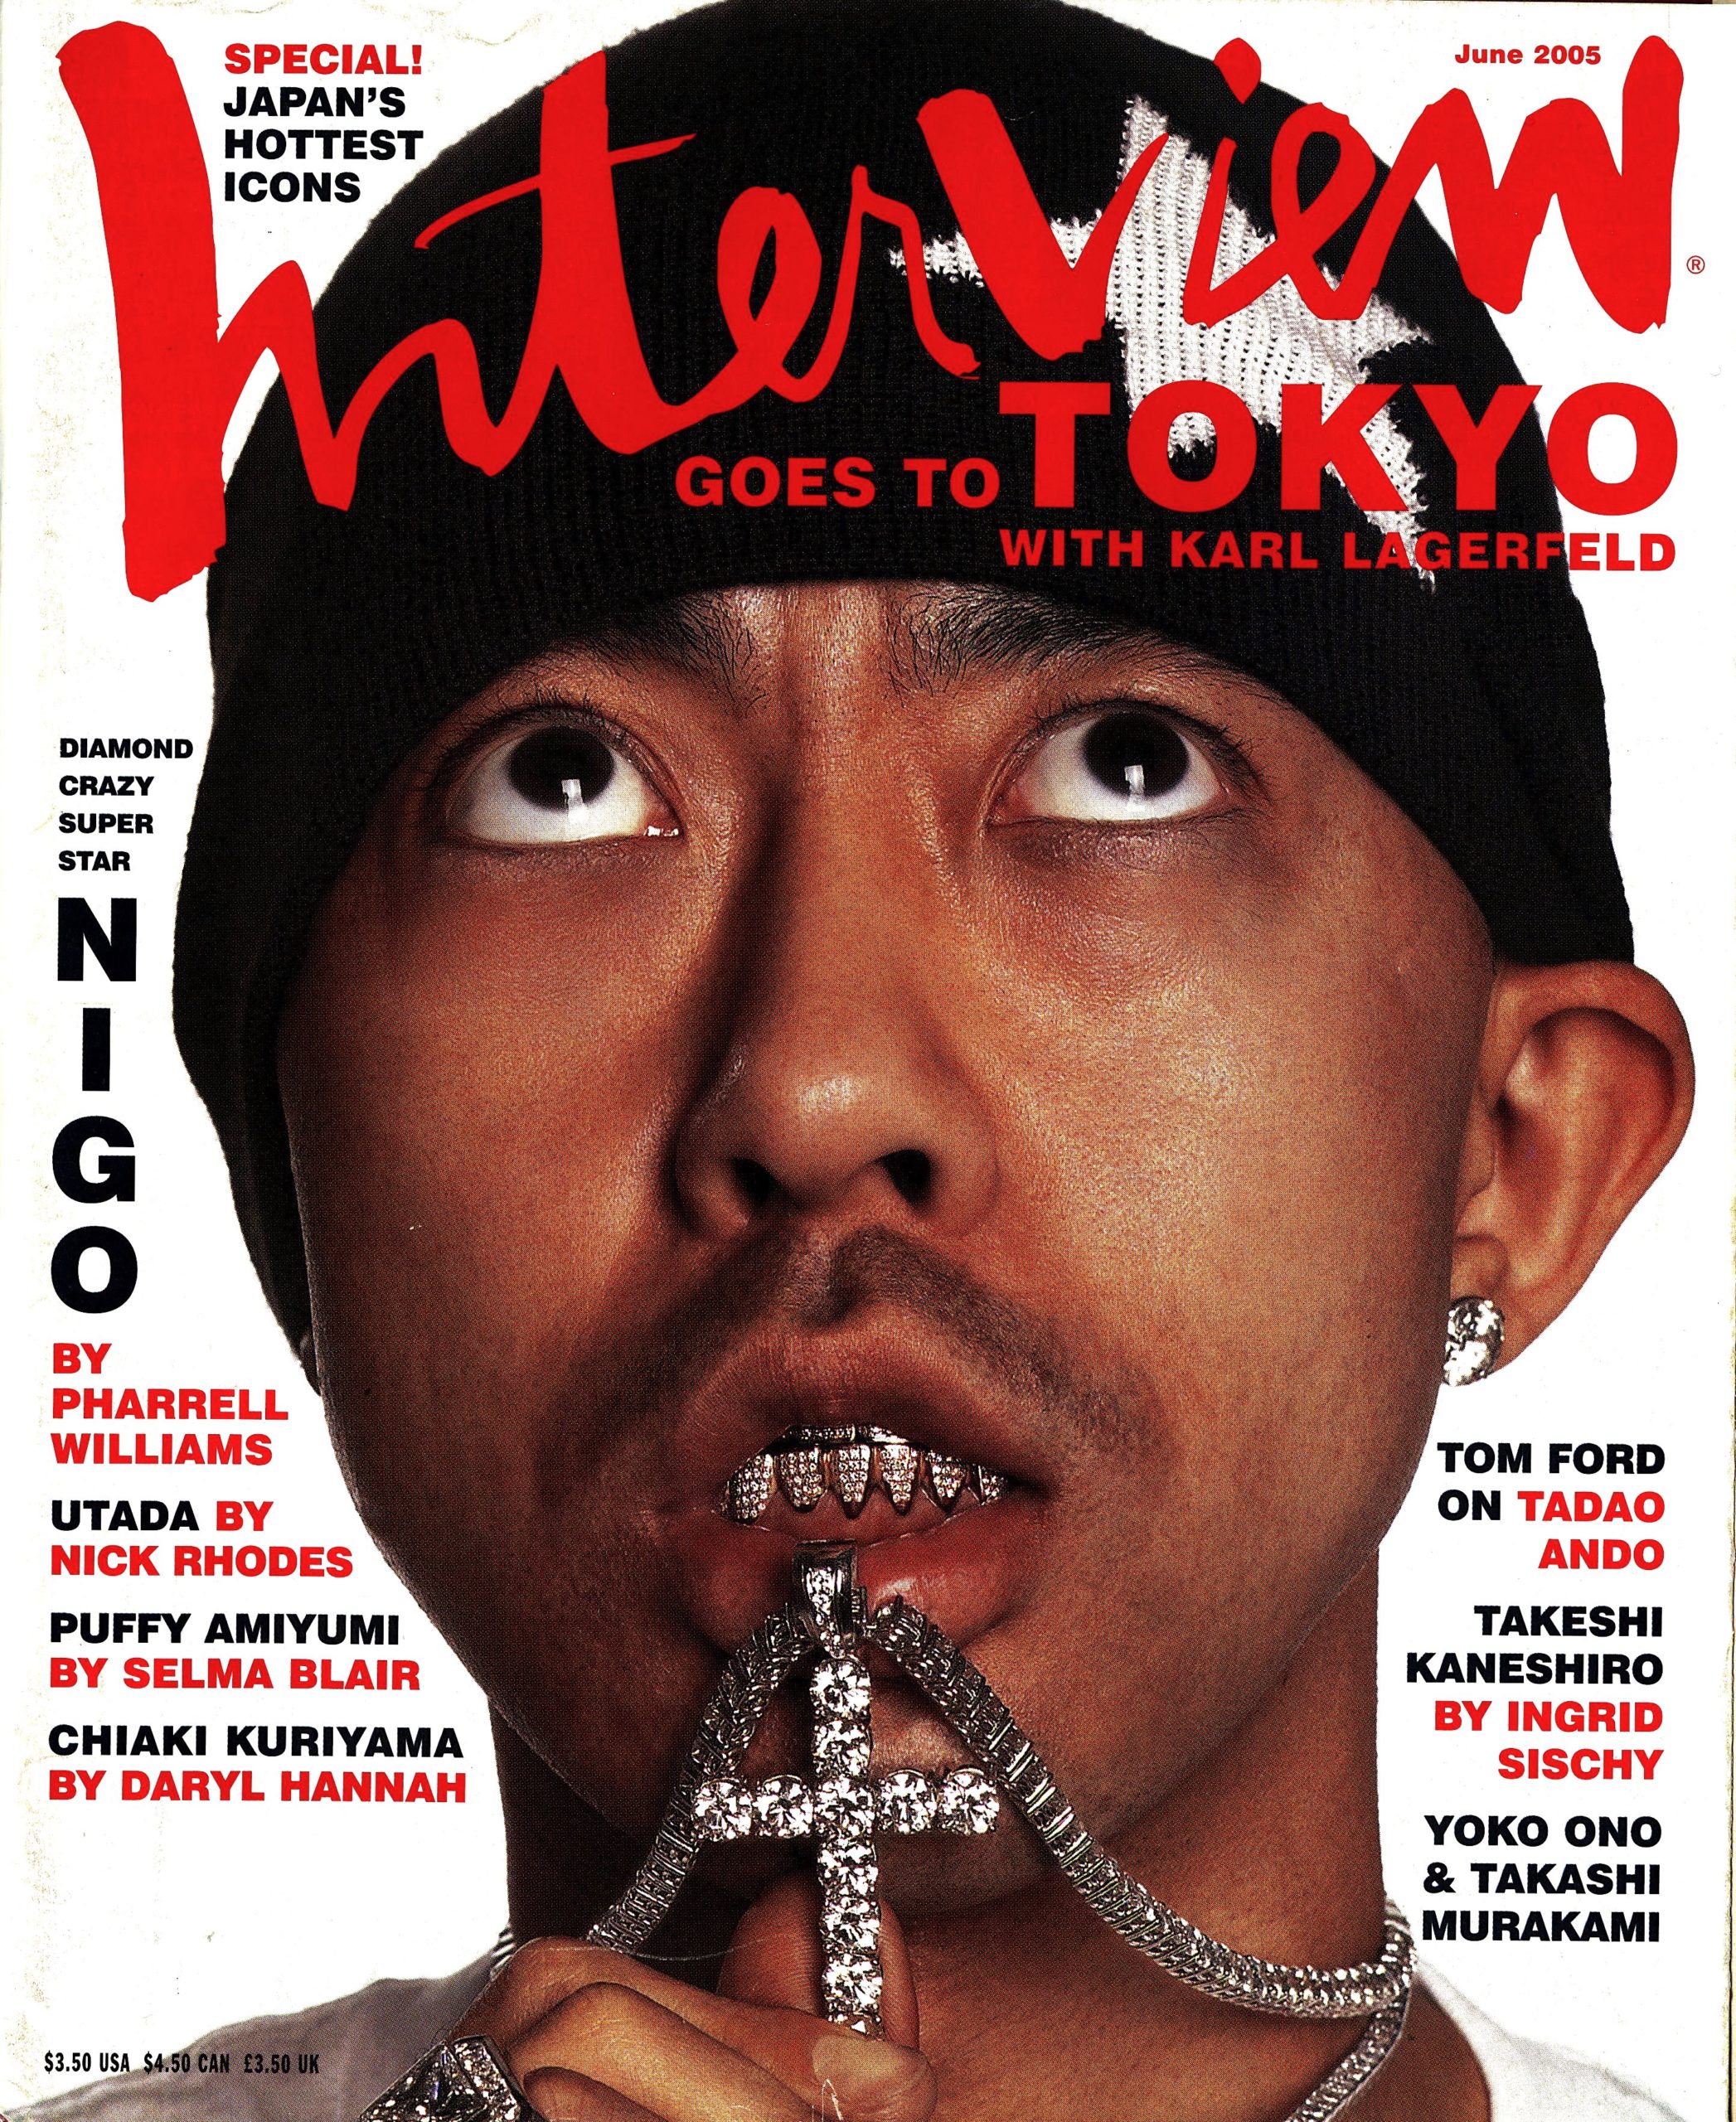 From the Vault: Nigo and Pharrell on Sneaker Drops and Bootleggers